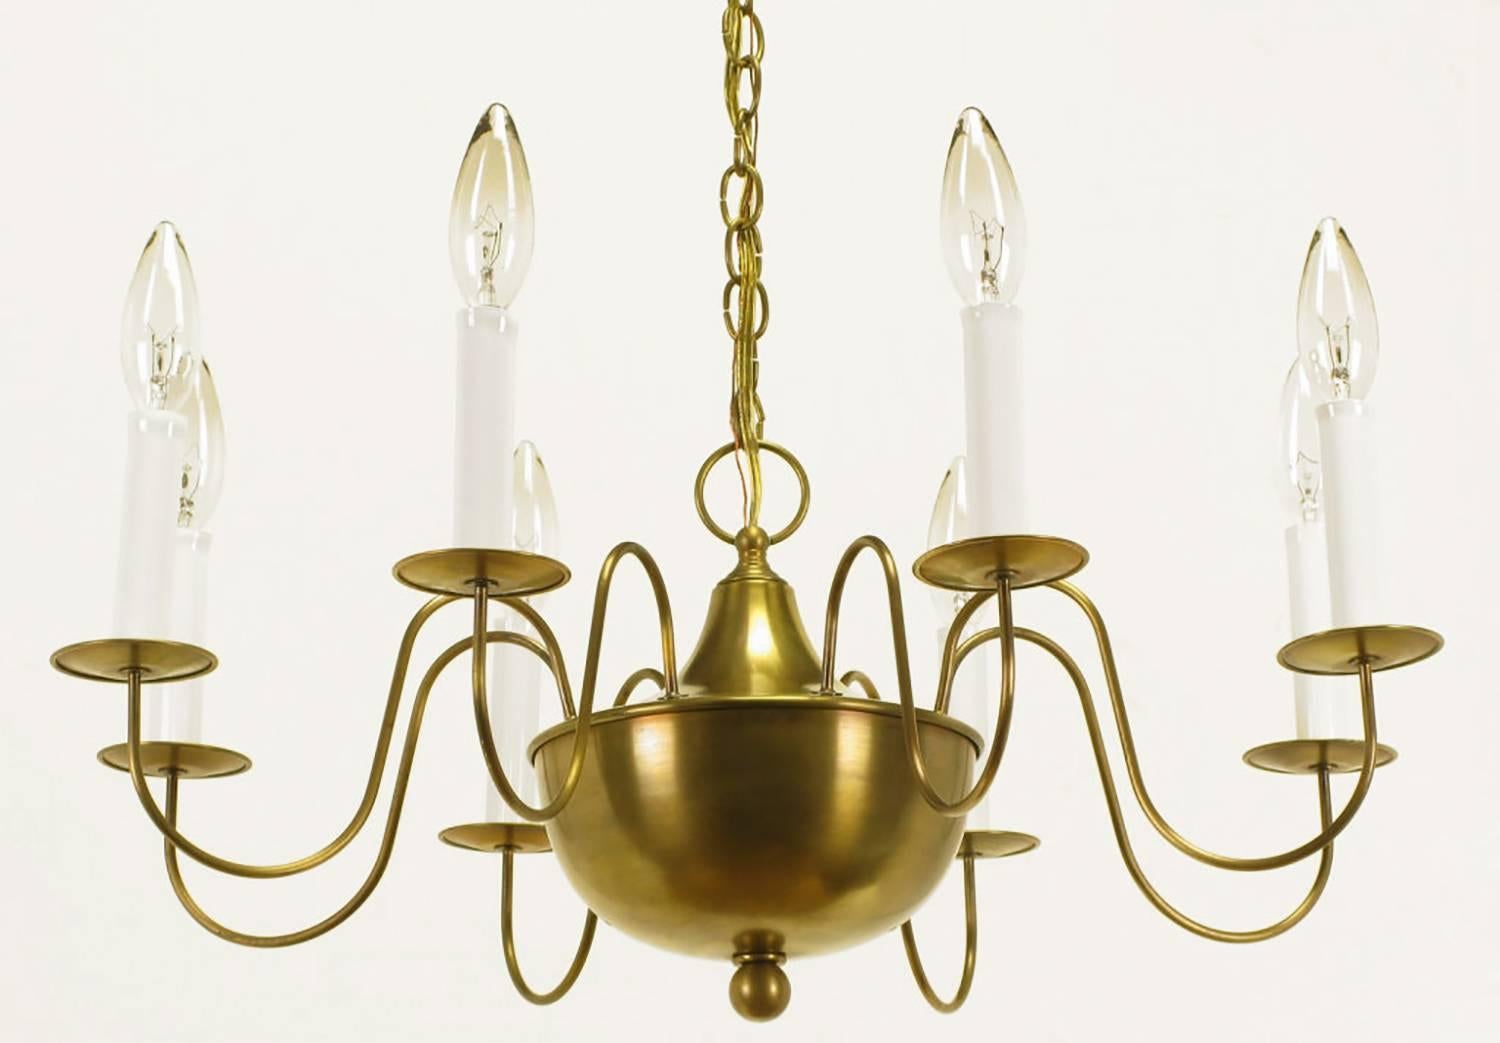 Fine Hand-Spun Brass Eight-Light Chandelier with Delicate Arms In Excellent Condition For Sale In Chicago, IL